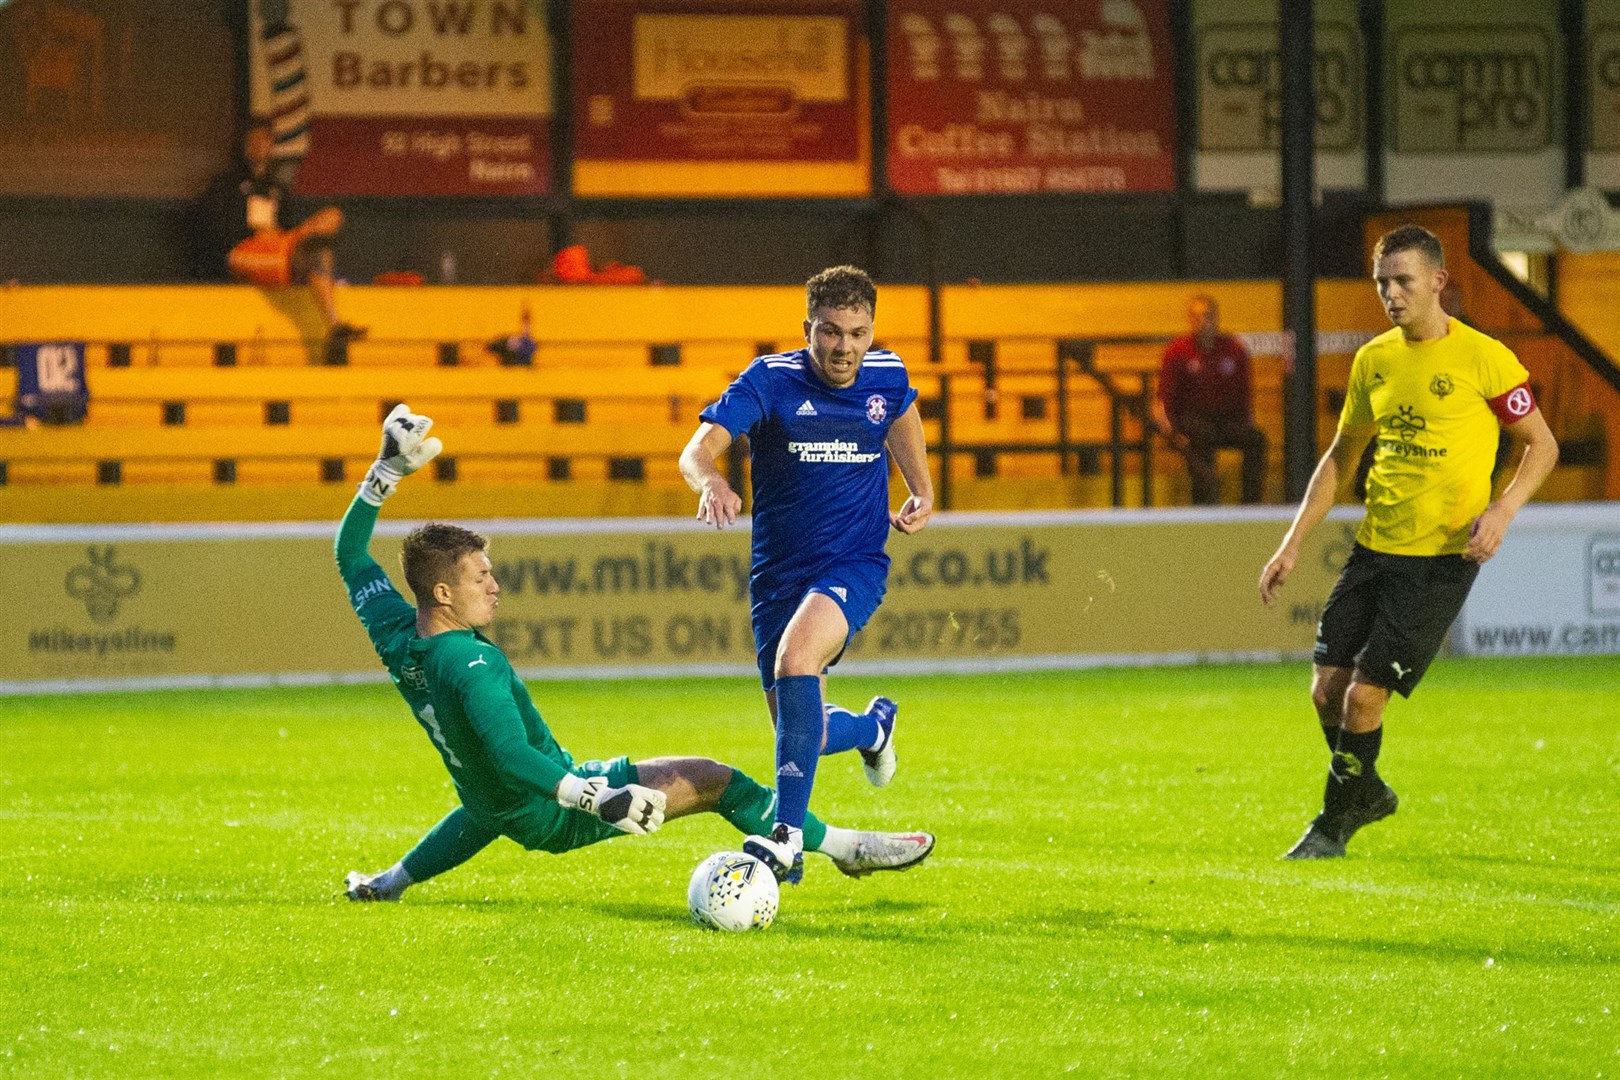 Lossie's Ryan Stuart rounds Nairn goalkeeper Will Counsell to score his hat-trick. Picture: Daniel Forsyth